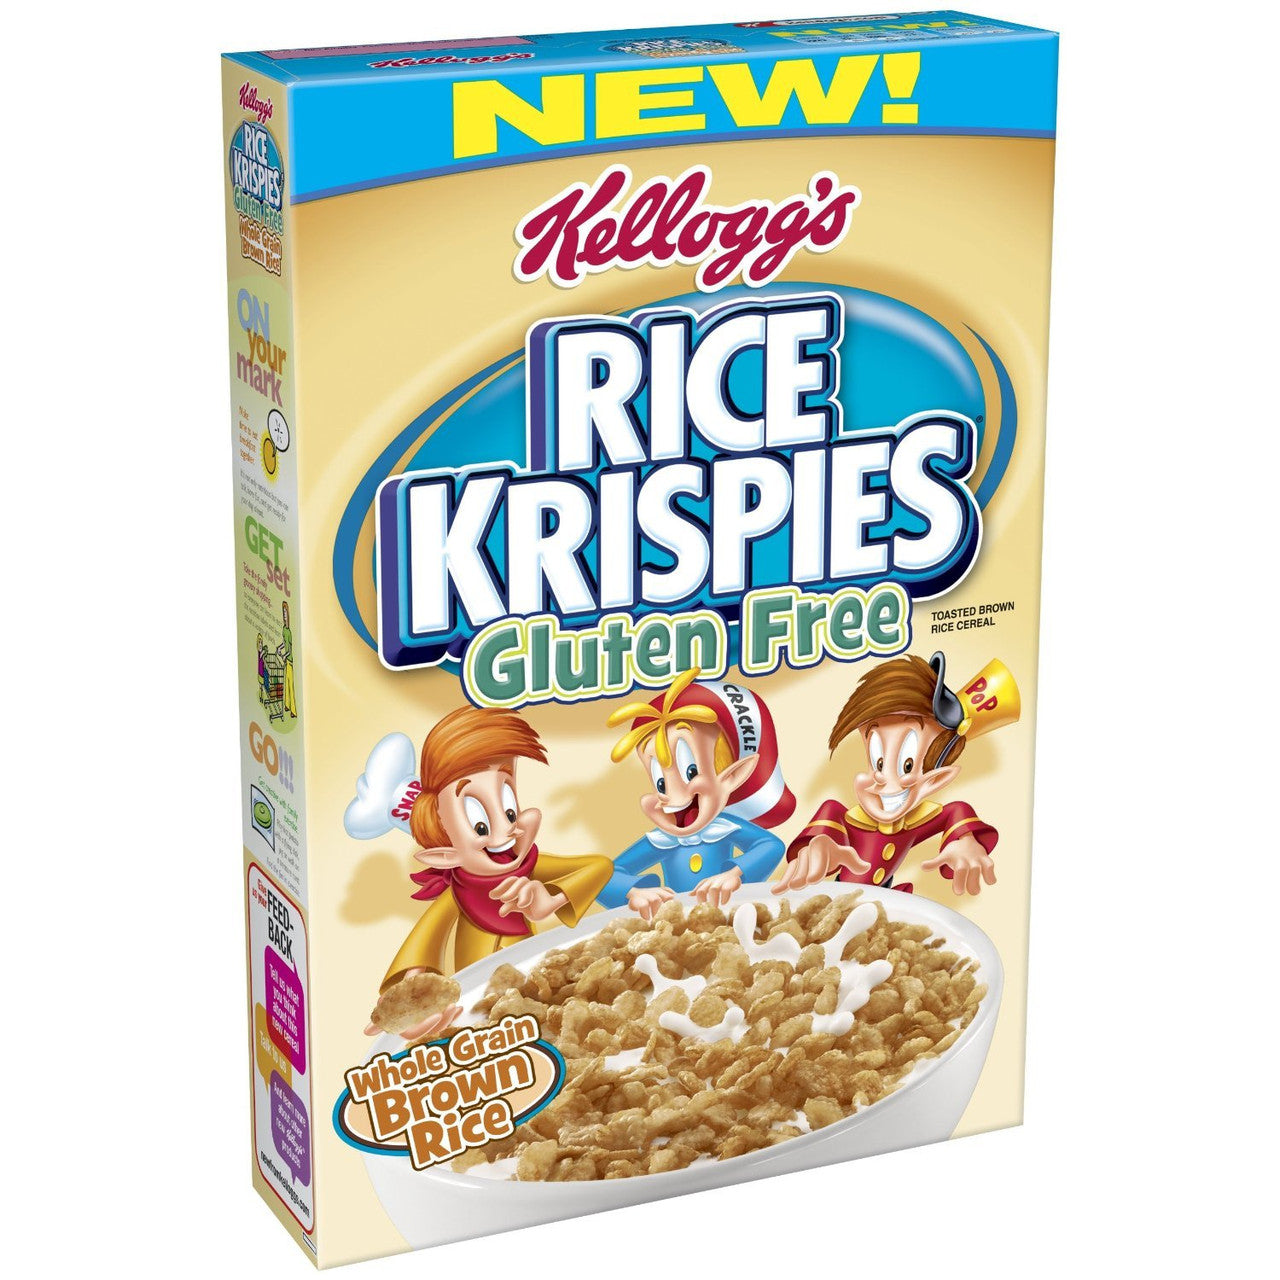 Kellogg's Rice Krispies Gluten Free Cereal, Whole Grain Brown Rice  (2 Pack)